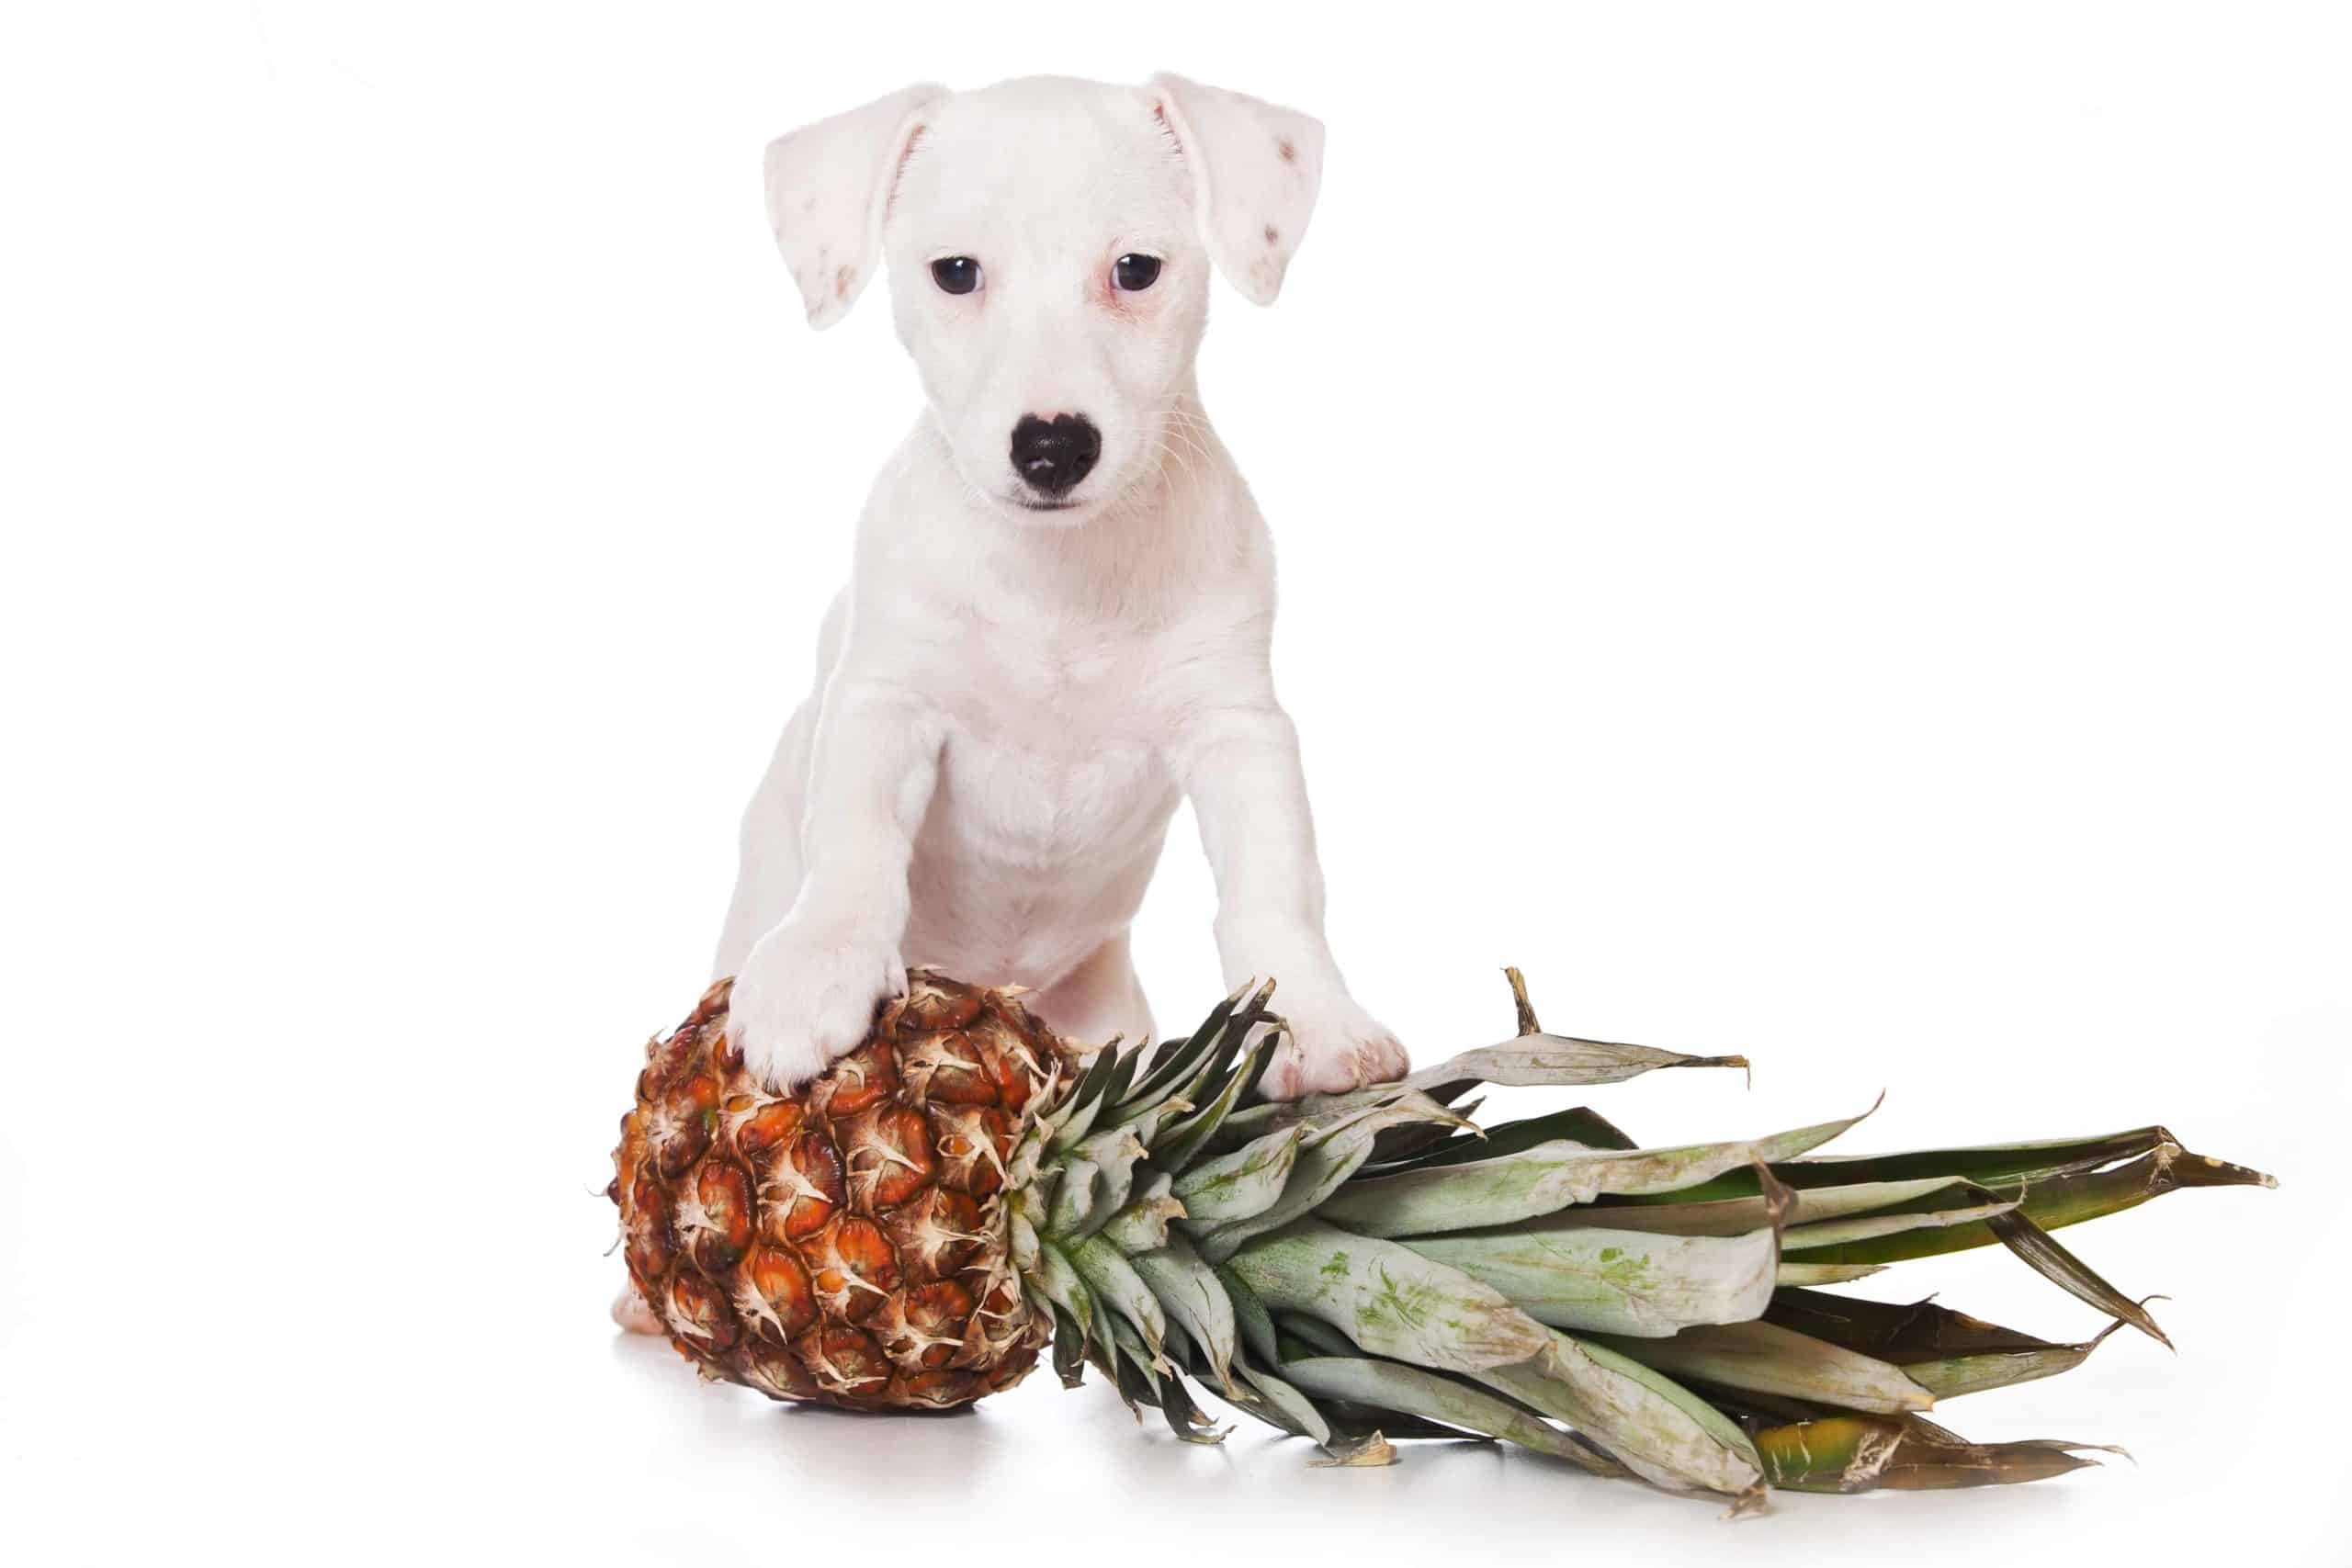 Feeding pineapple to dogs: Stick to small bites of fresh pineapple